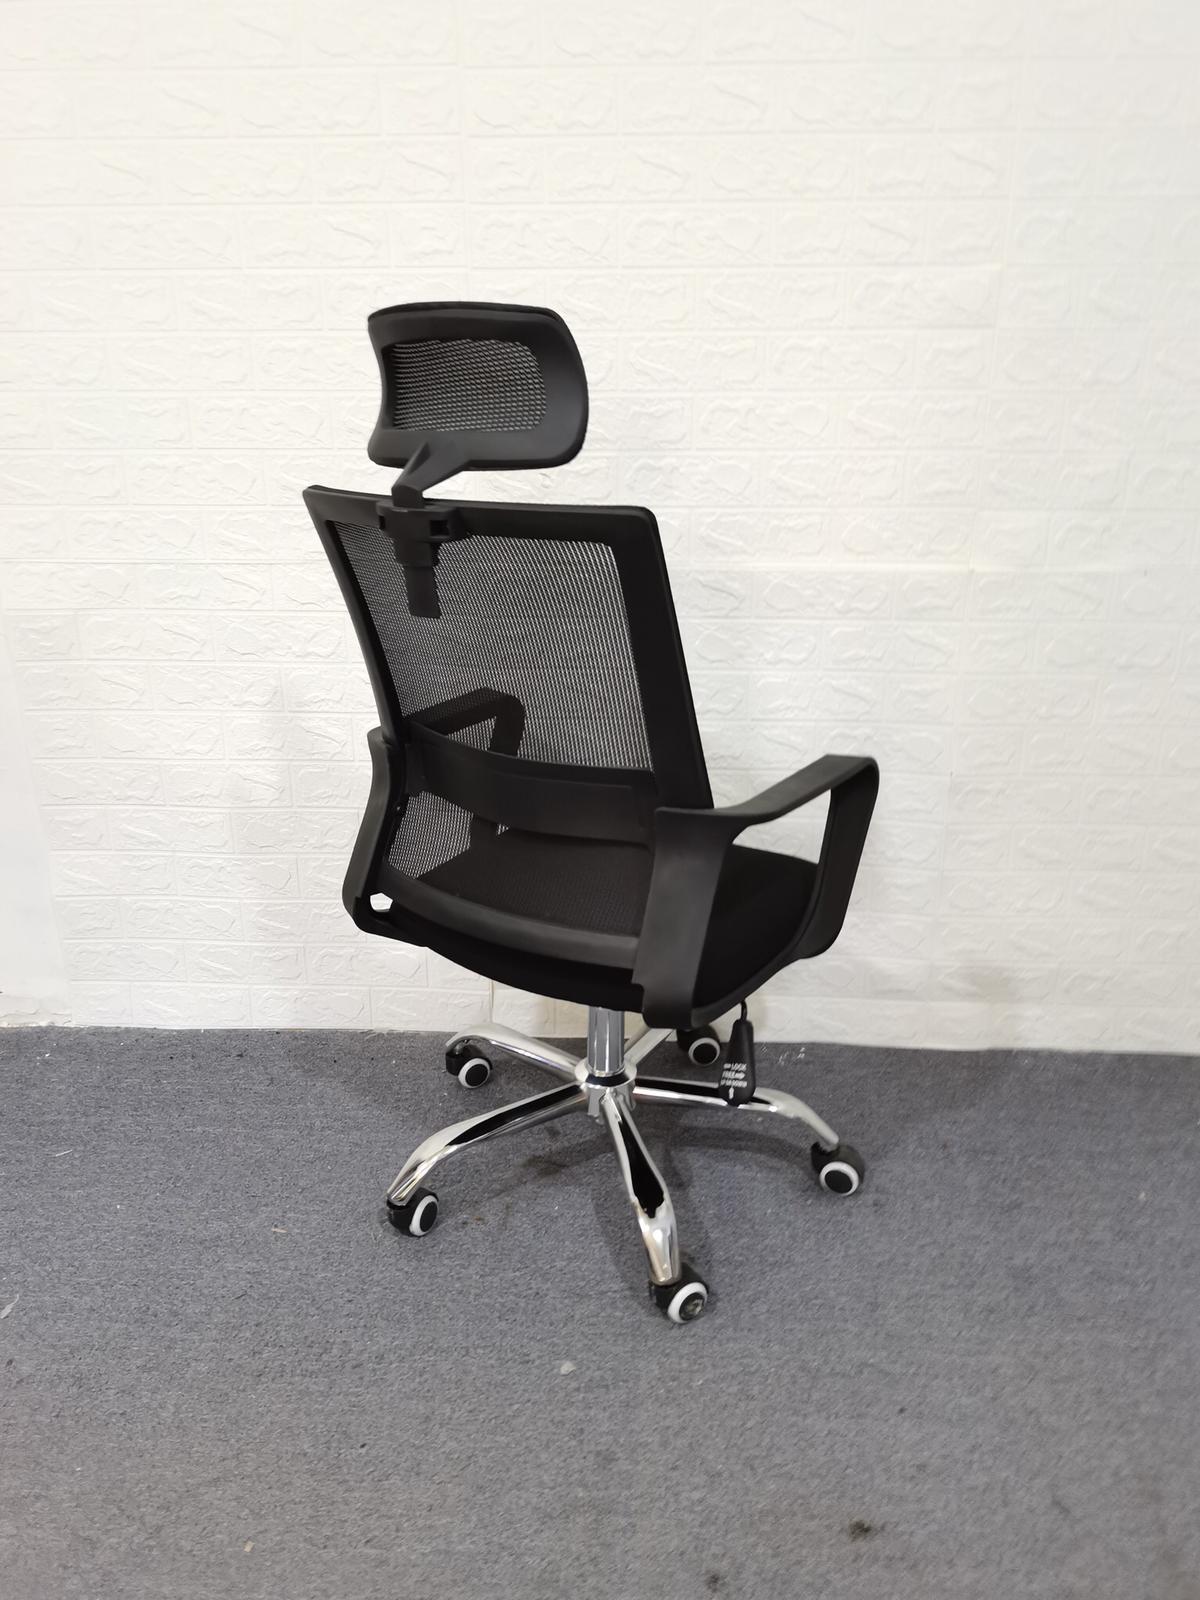 Ergonomic Mesh Office Chair, High Back Desk Chair - Adjustable Headrest and Height, Fixed Armrest -  Tilt Function, Comfortable Back Support and Roller Wheels, Swivel Computer Task Chair - image 5 of 5